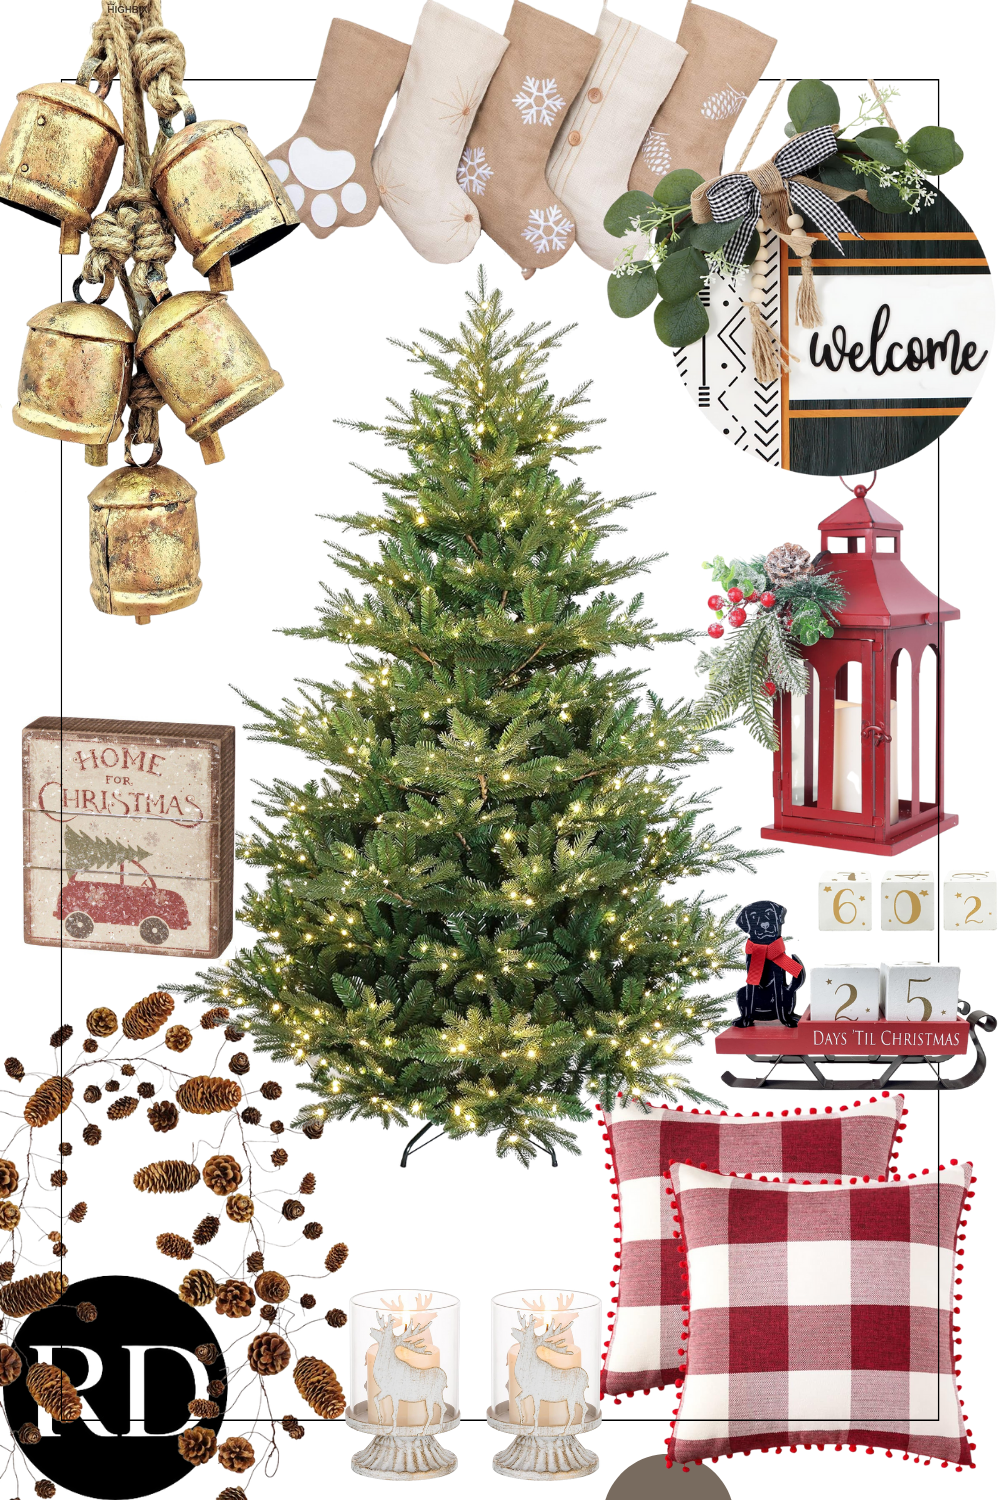 Top 10 Most Festive Decors for a Rustic Christmas Living Room Transformation!